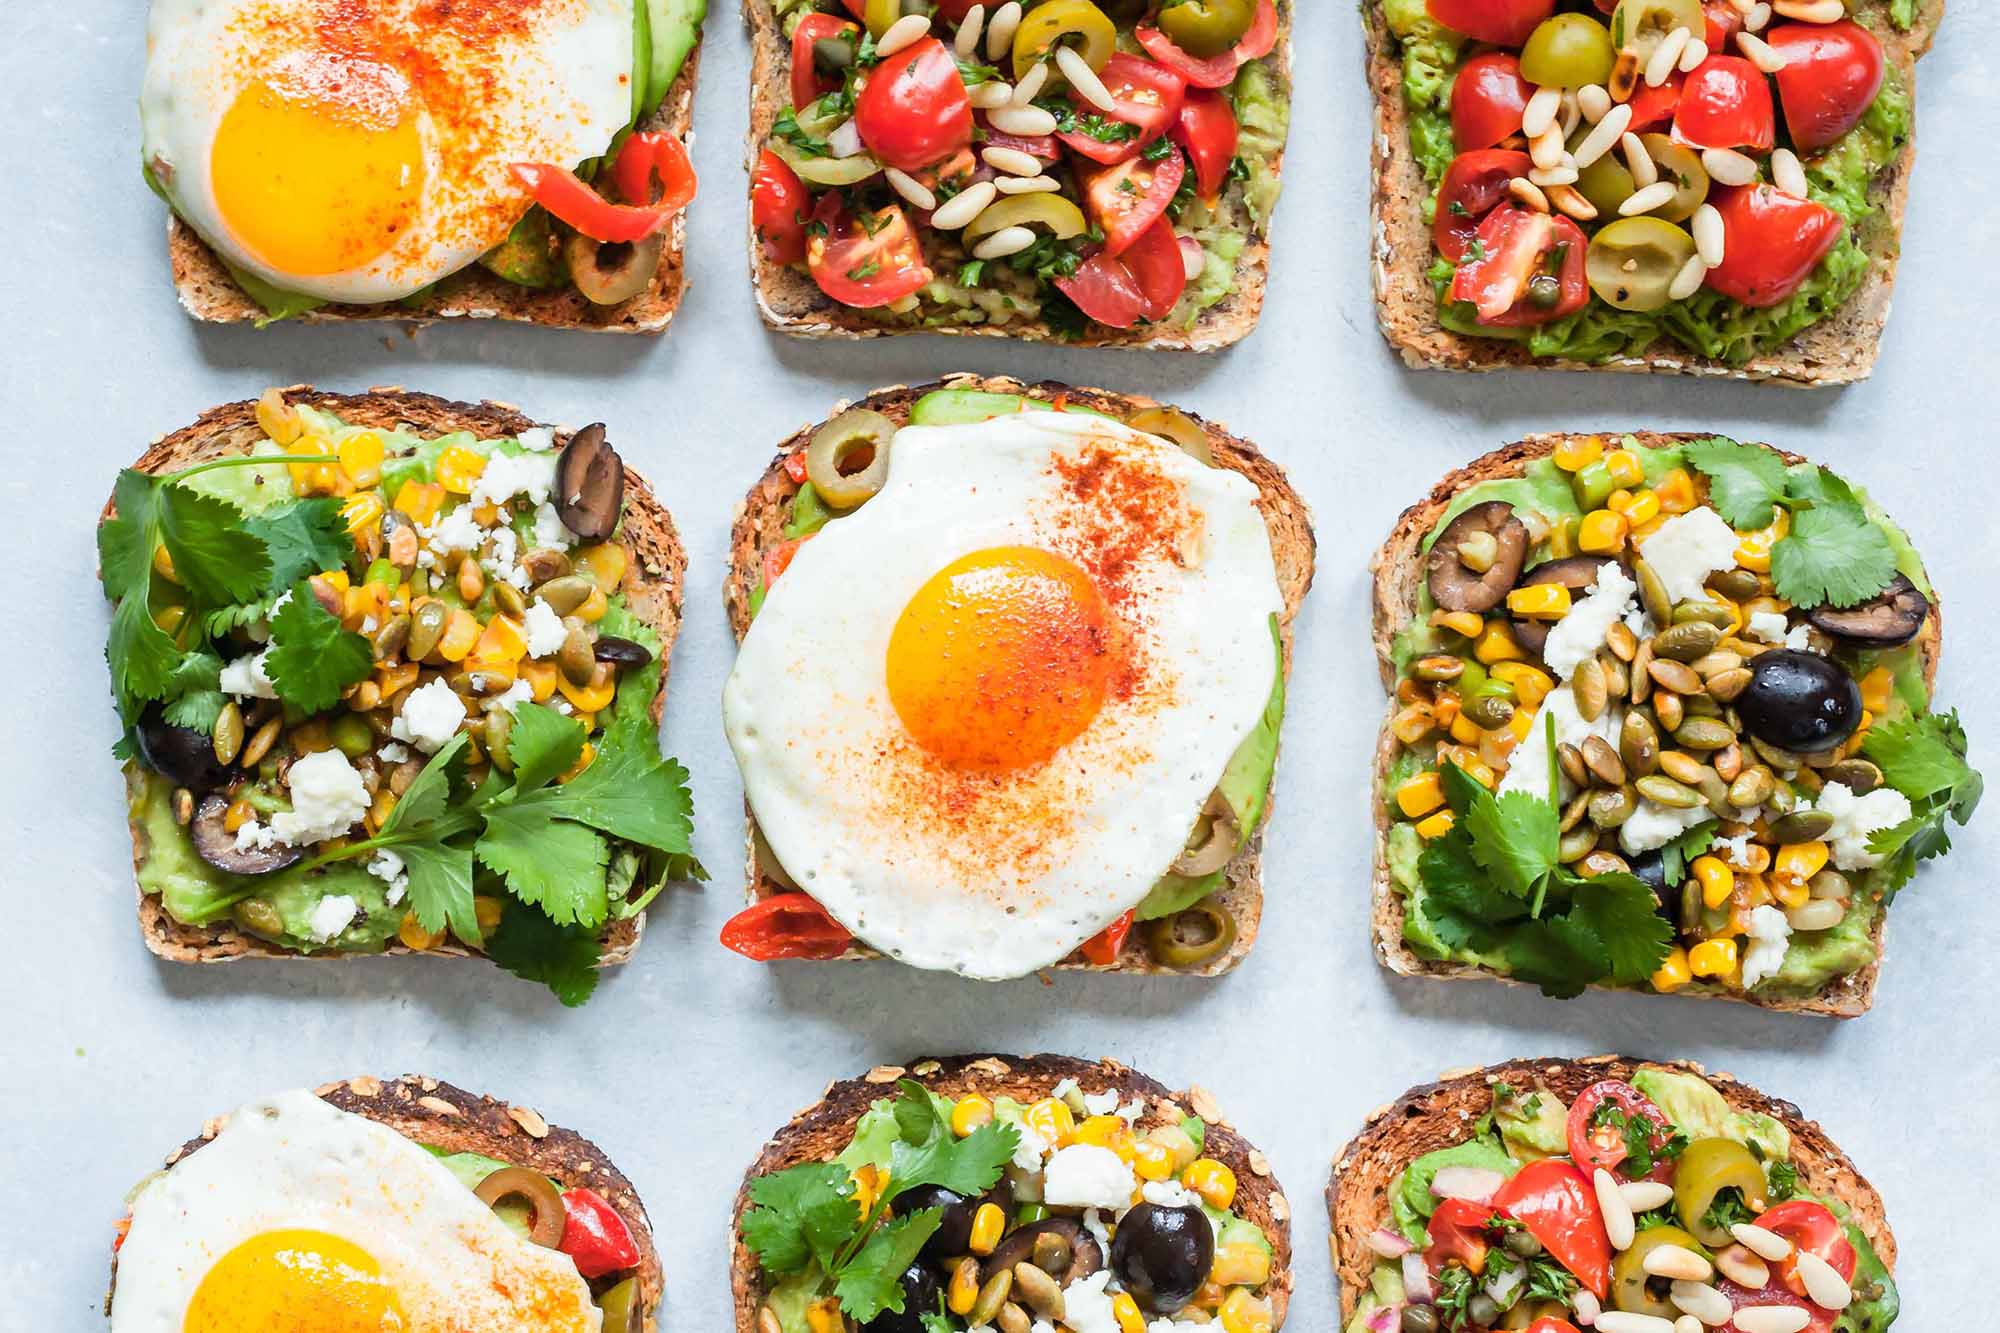 Only a Truly Cool Person Will Have Eaten at Least 13/25 of These Foods Avocado Toast